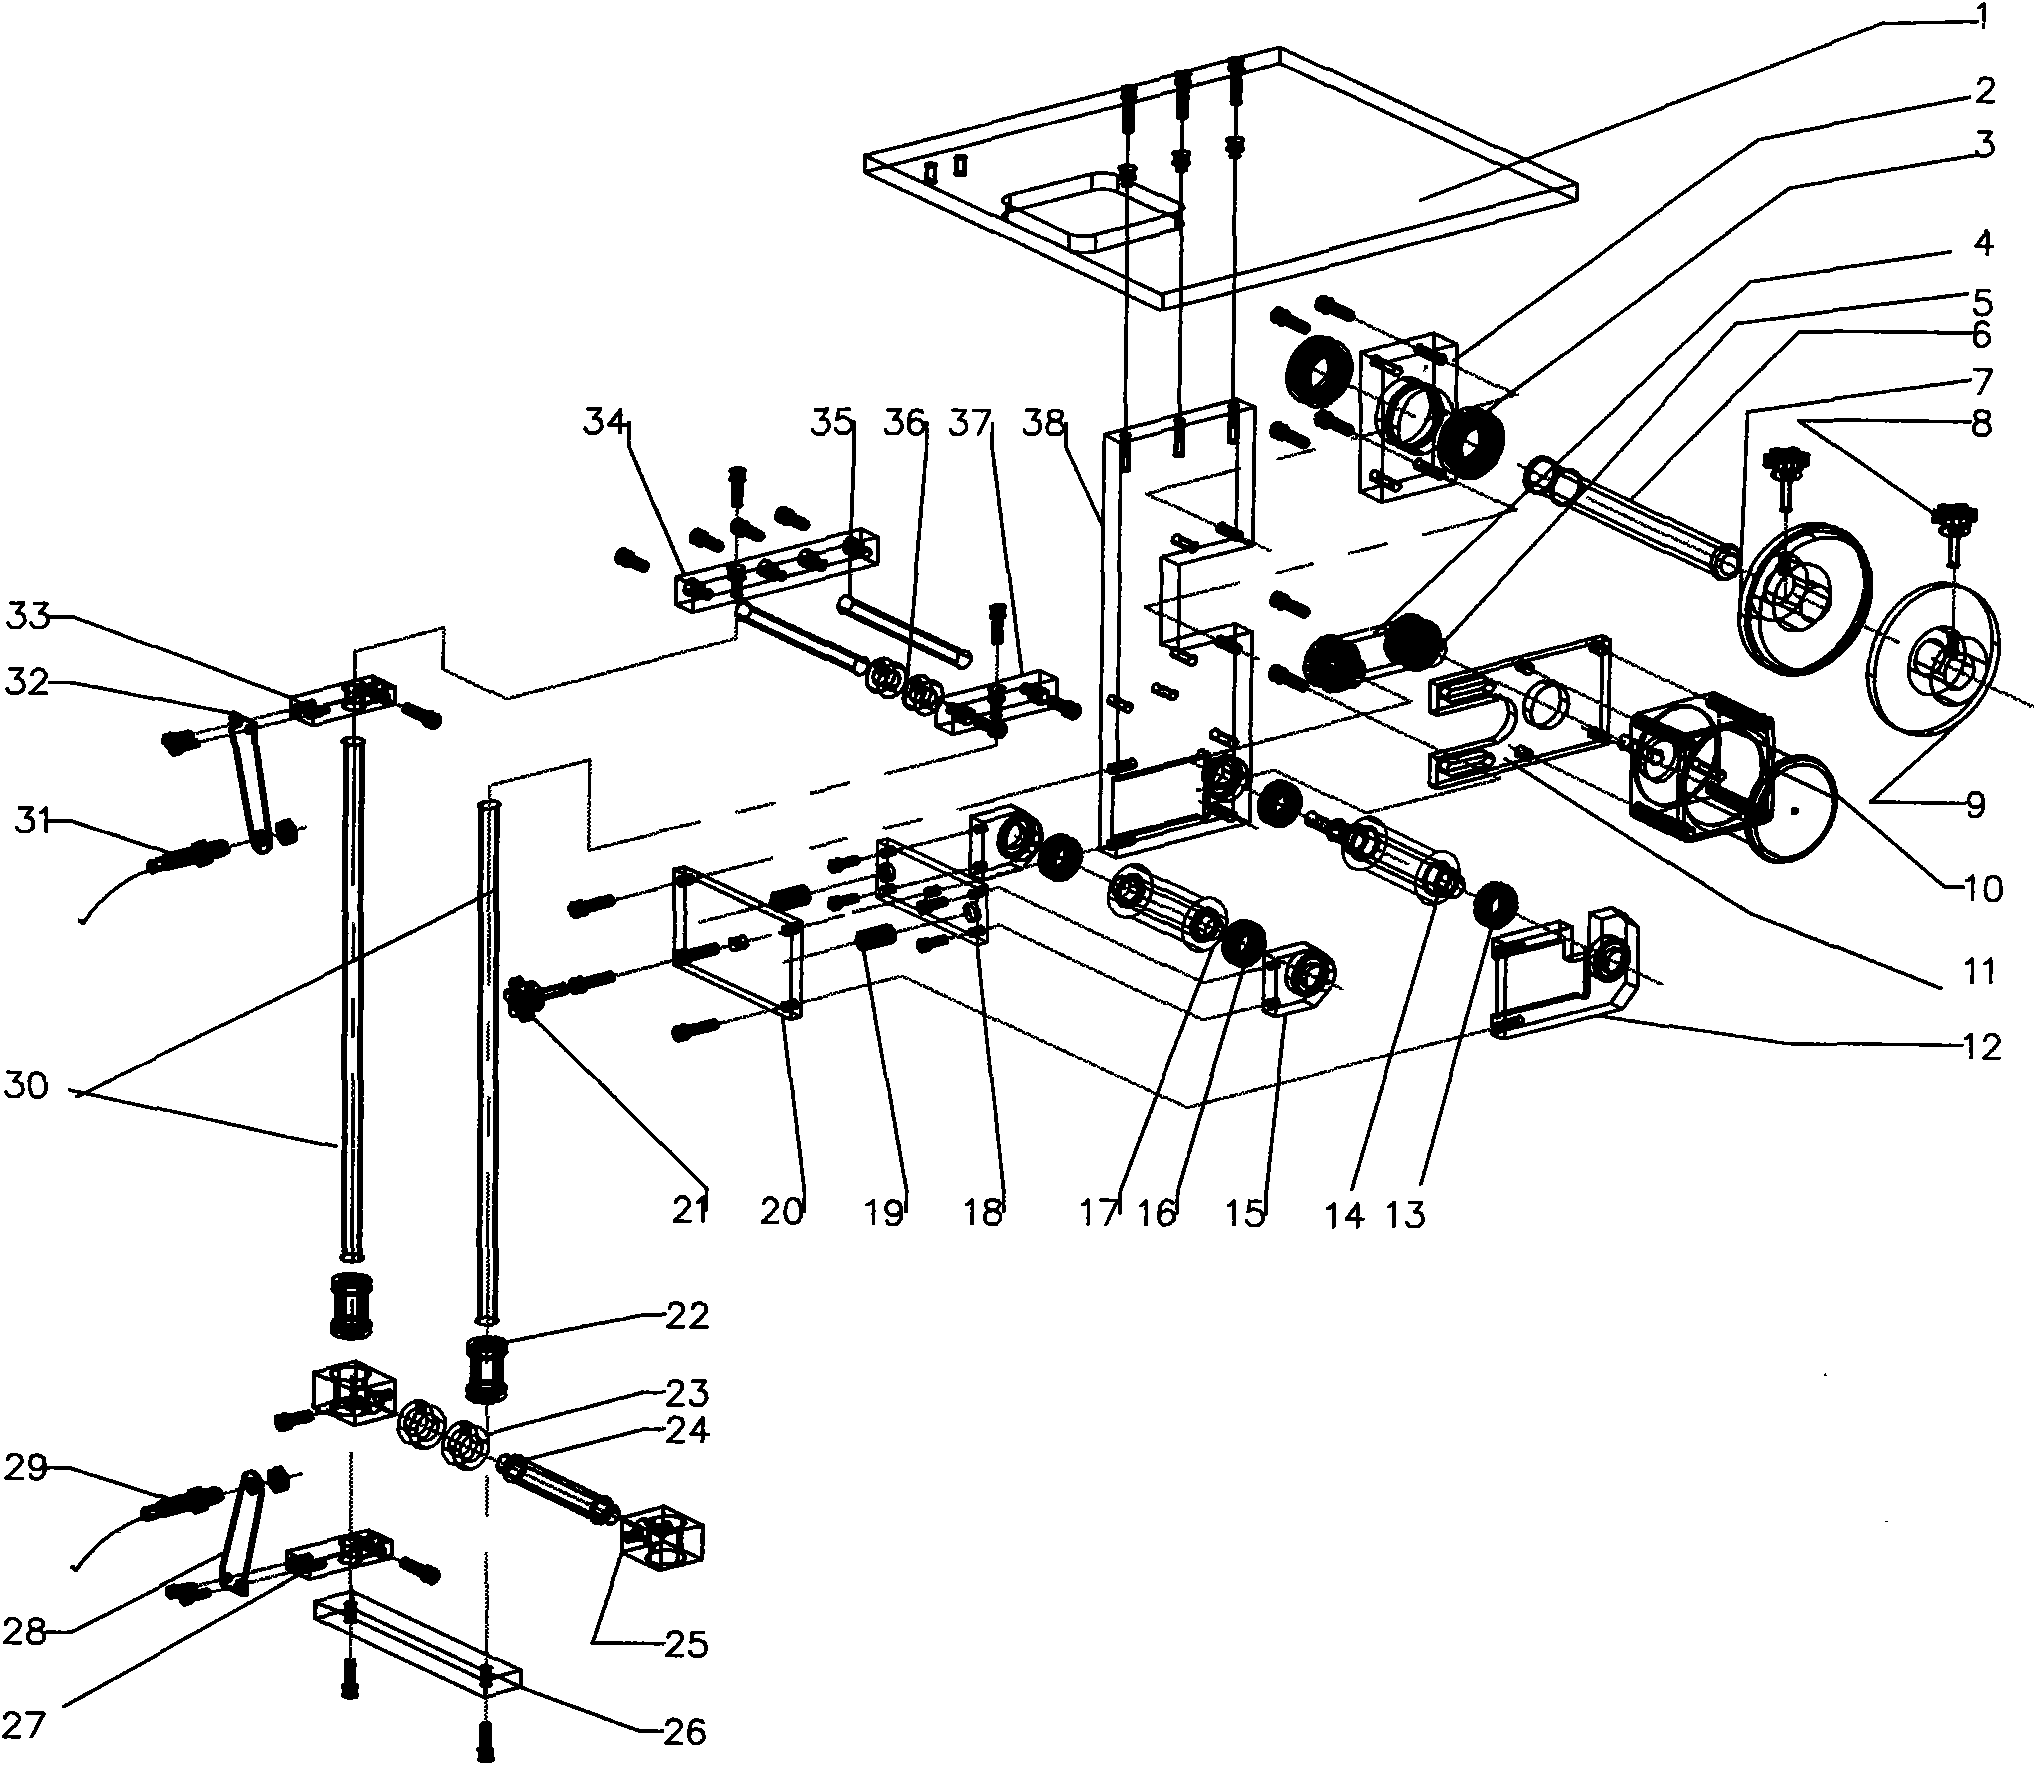 Single-sided tape tension control mechanism